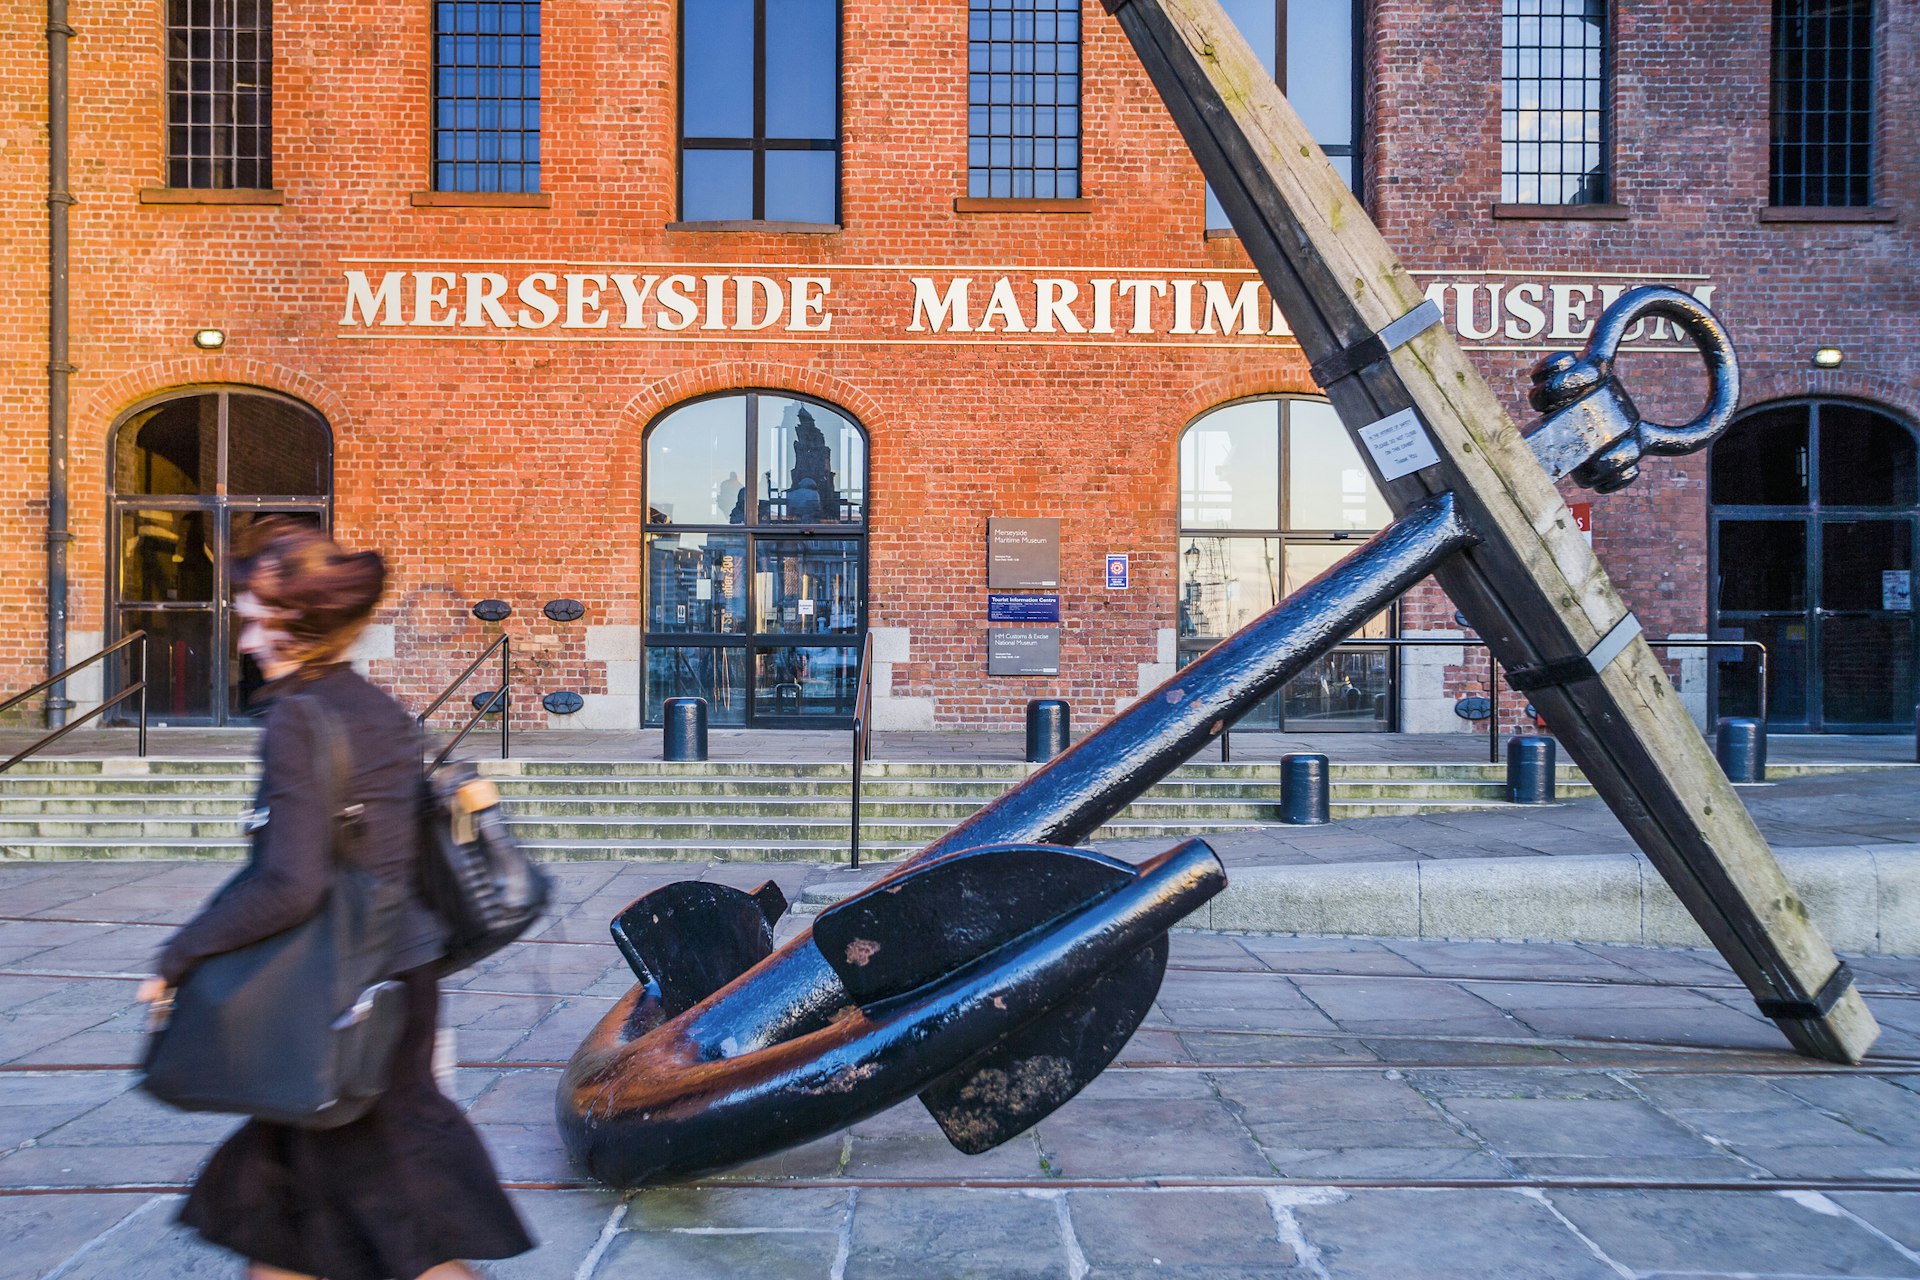 People walk past the entrance of the Merseyside Maritime Museum